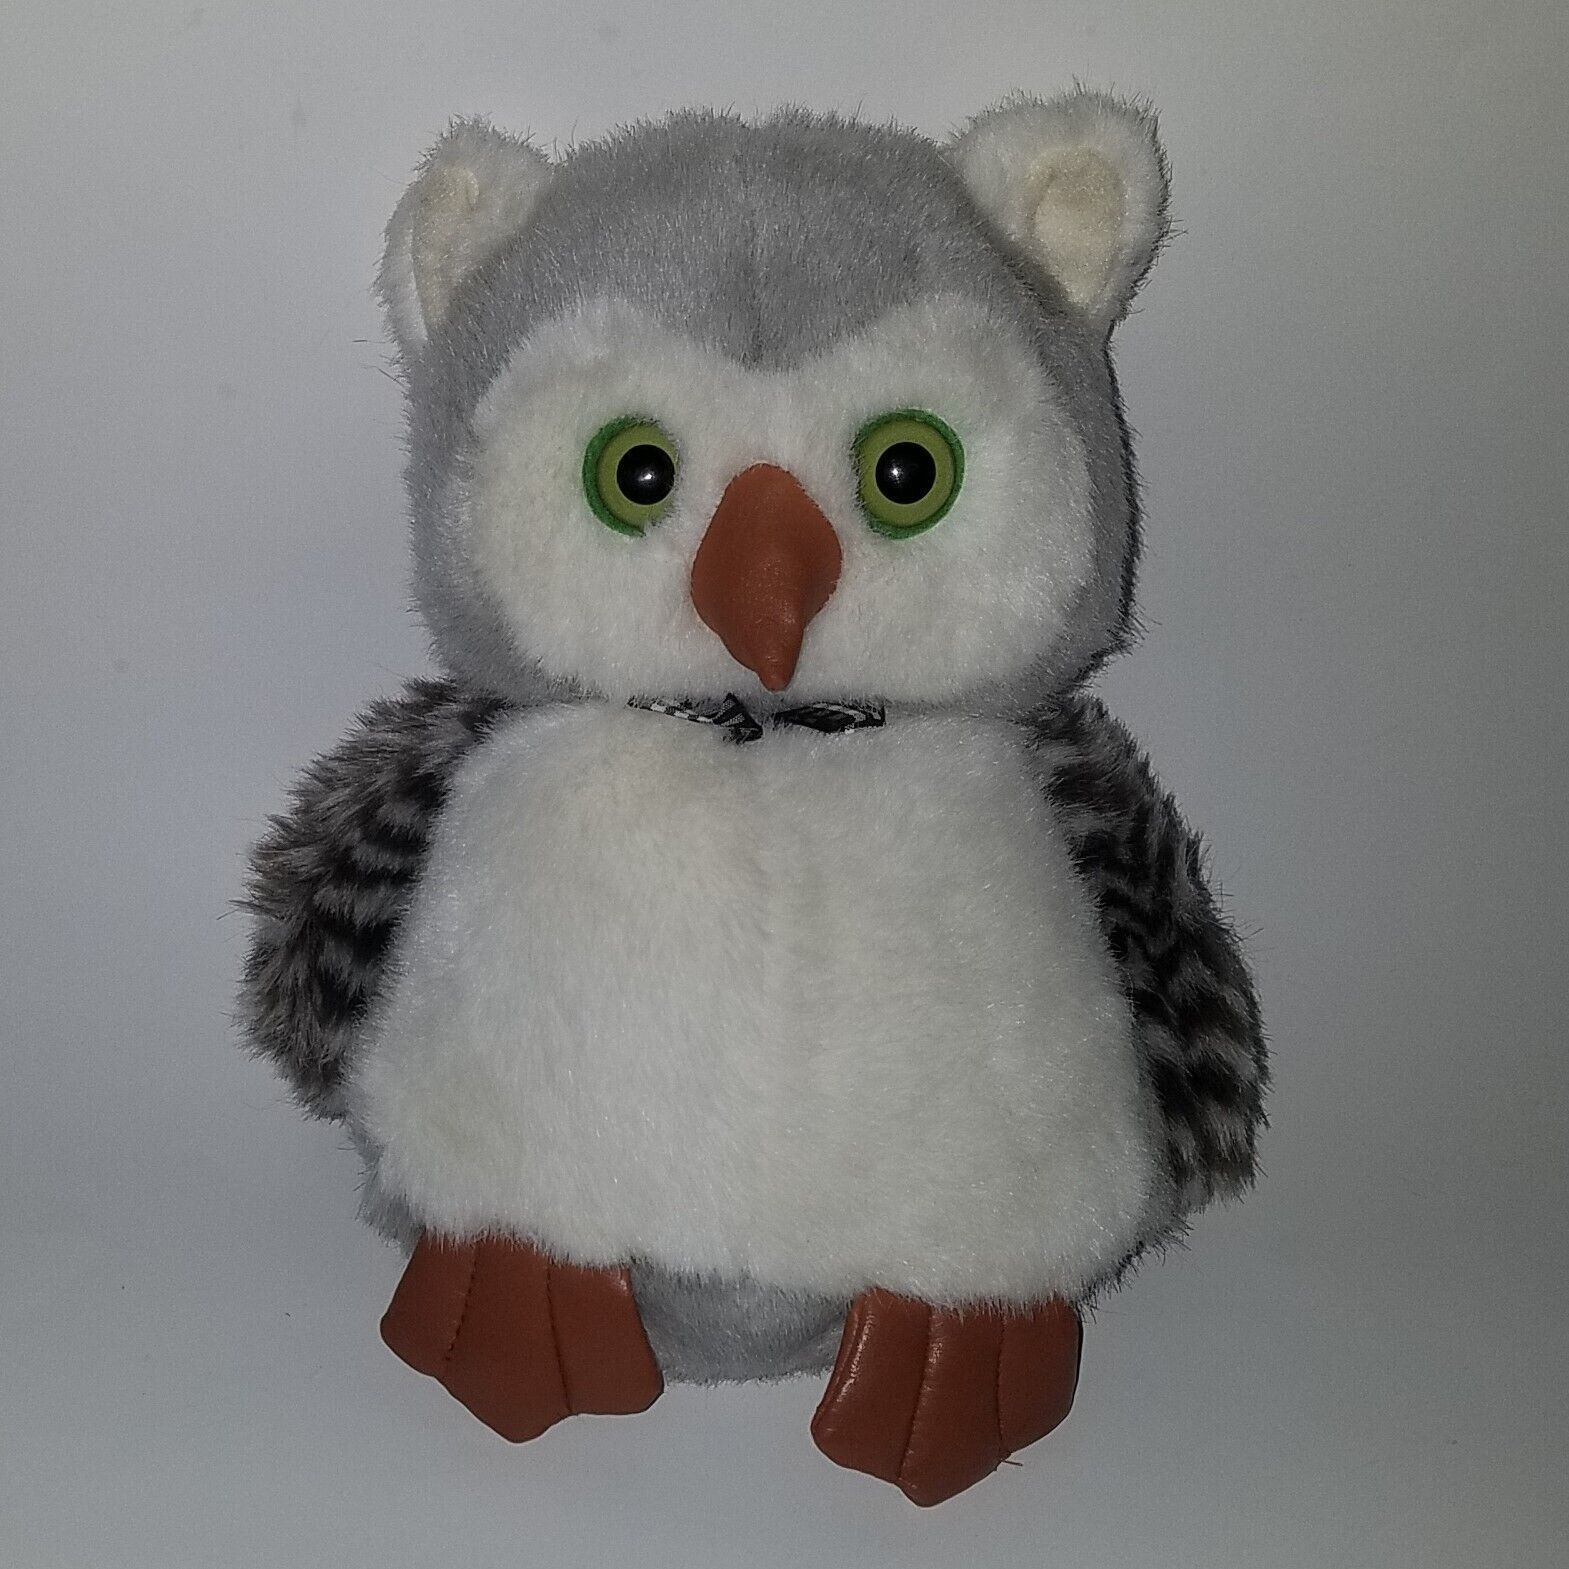 Primary image for Gray Owl Plush Stuffed Animal Toy Lovey 9" Bird Green Eyes Bowtie Soft Things